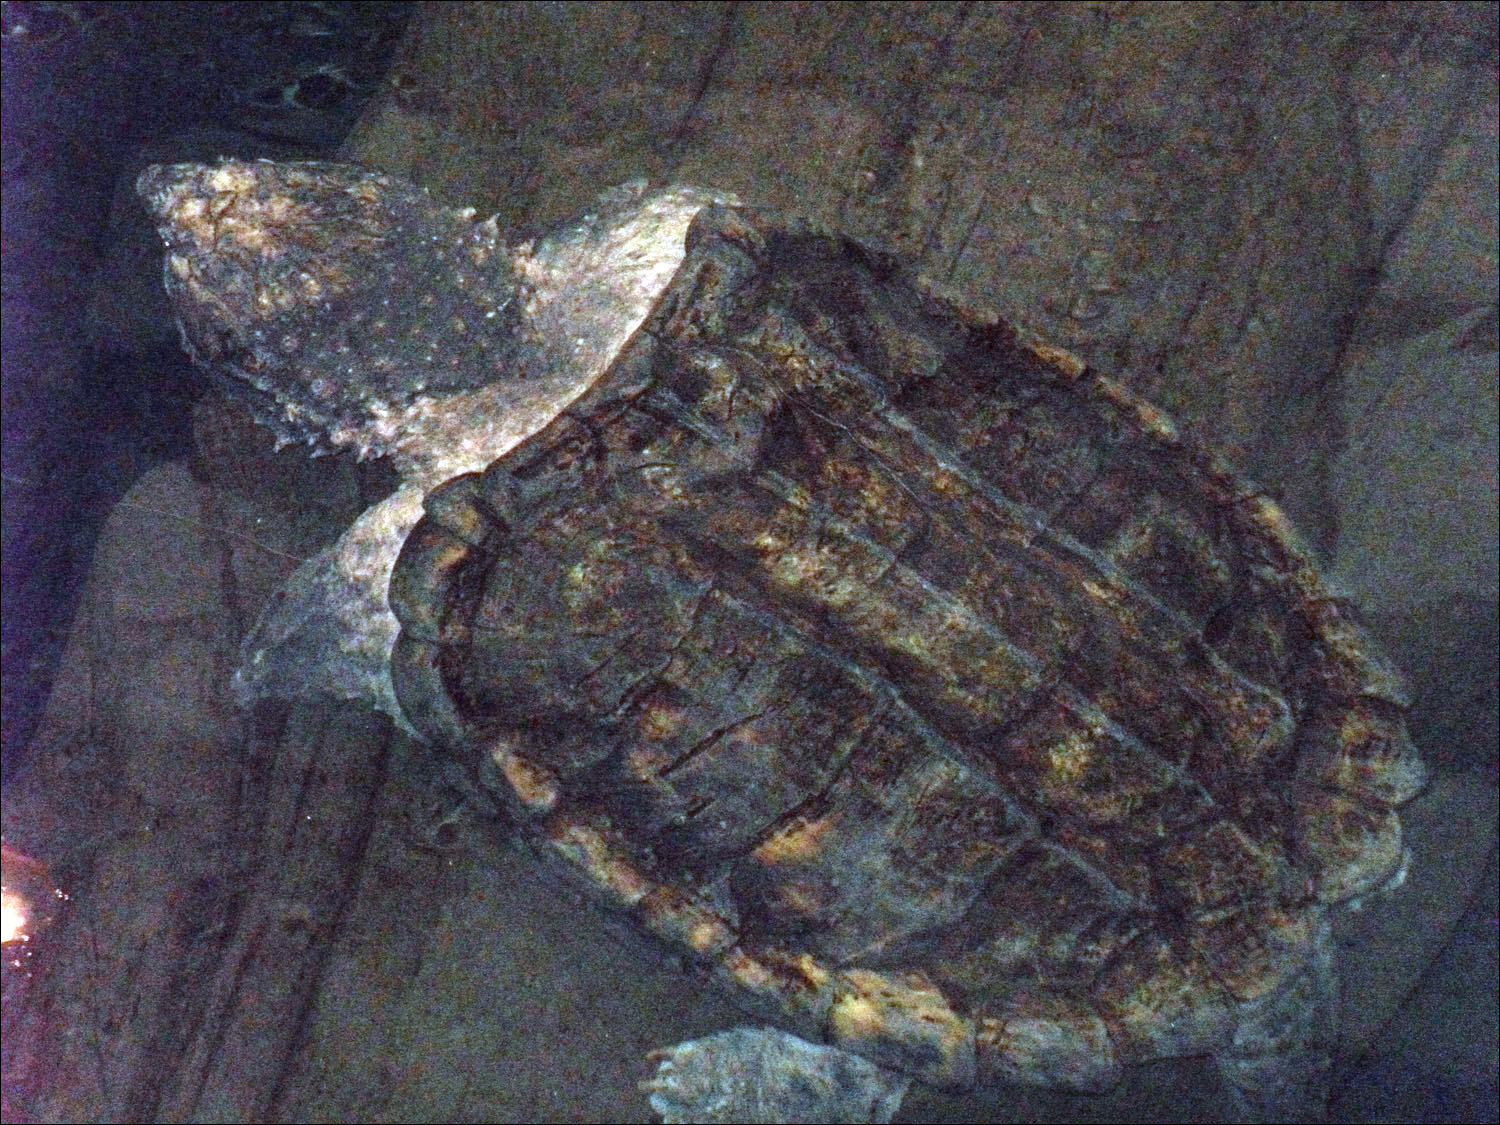 Snapping alligator turtle